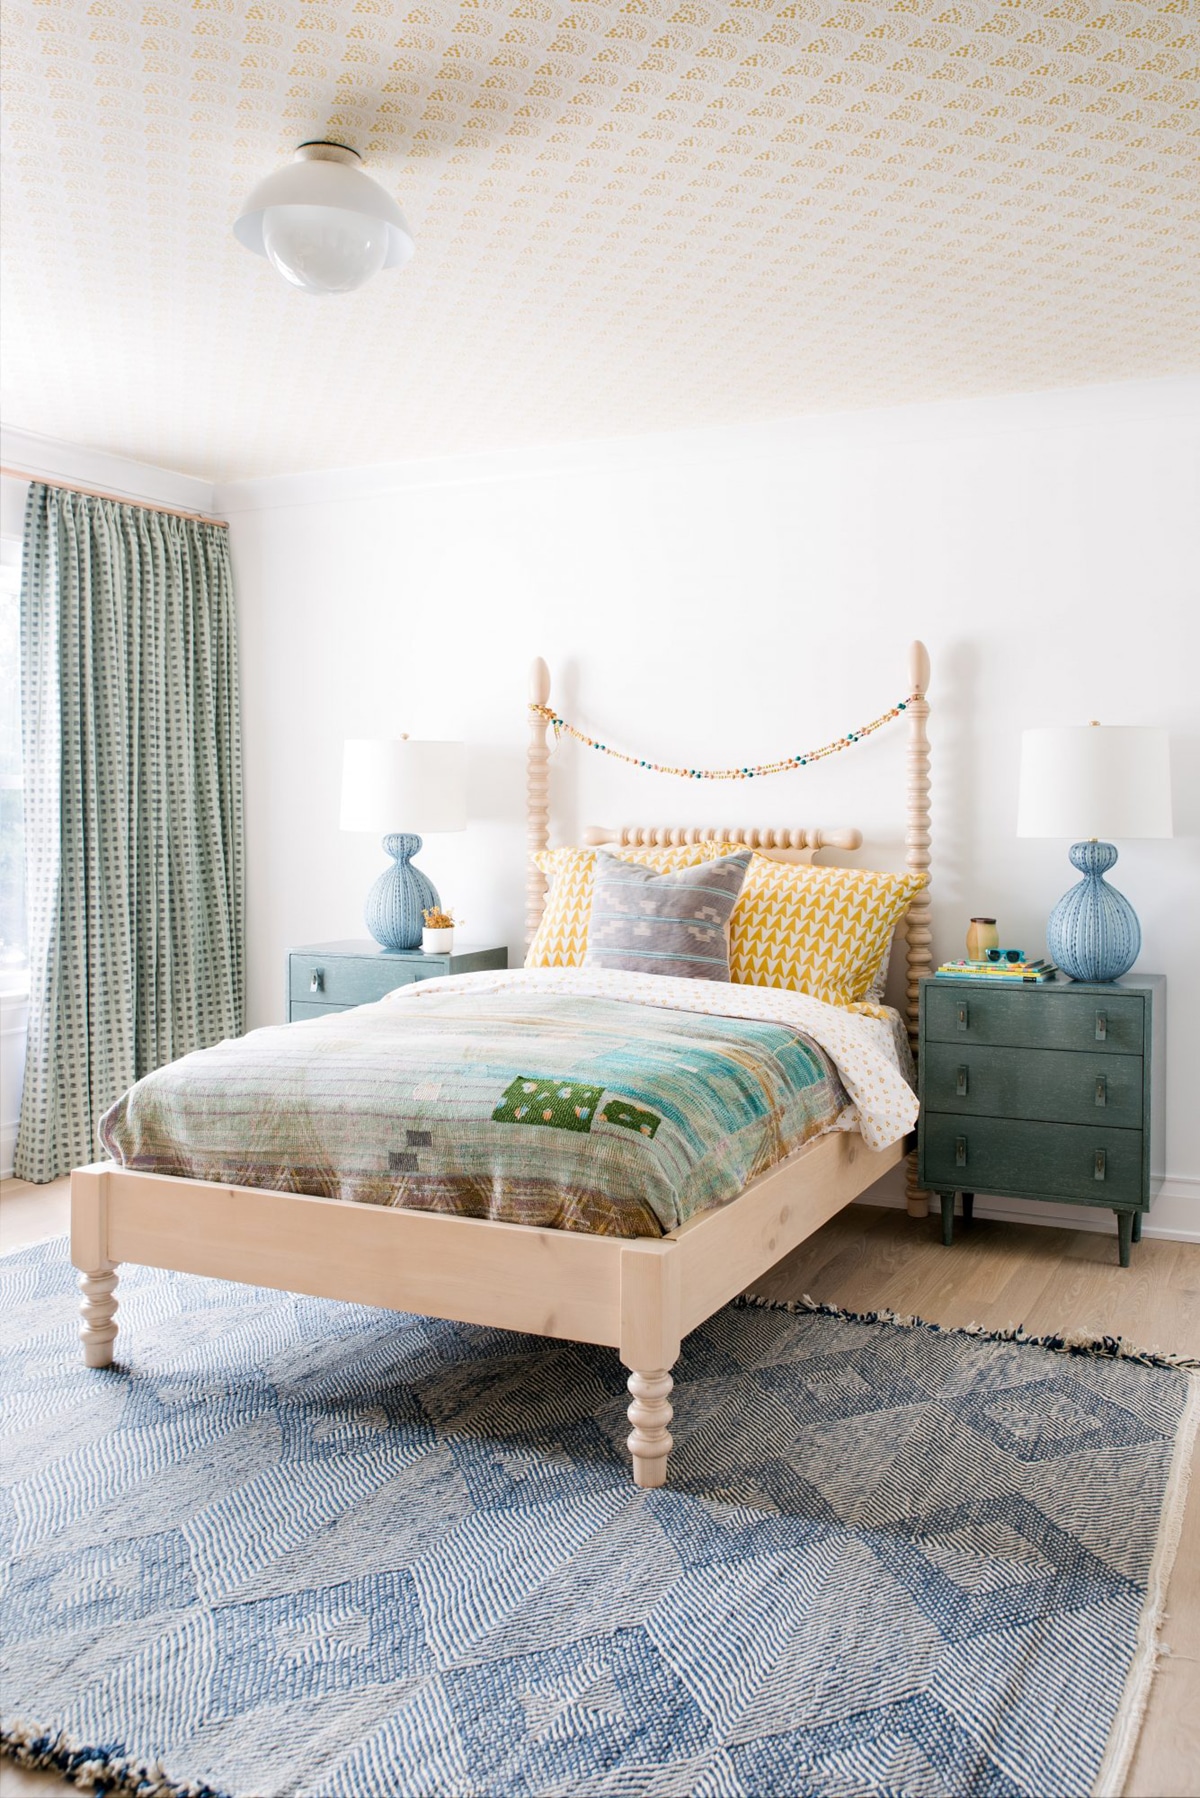 fresh layers of pattern and pastels in this bedroom by cortney bishop design | house tour on coco kelley